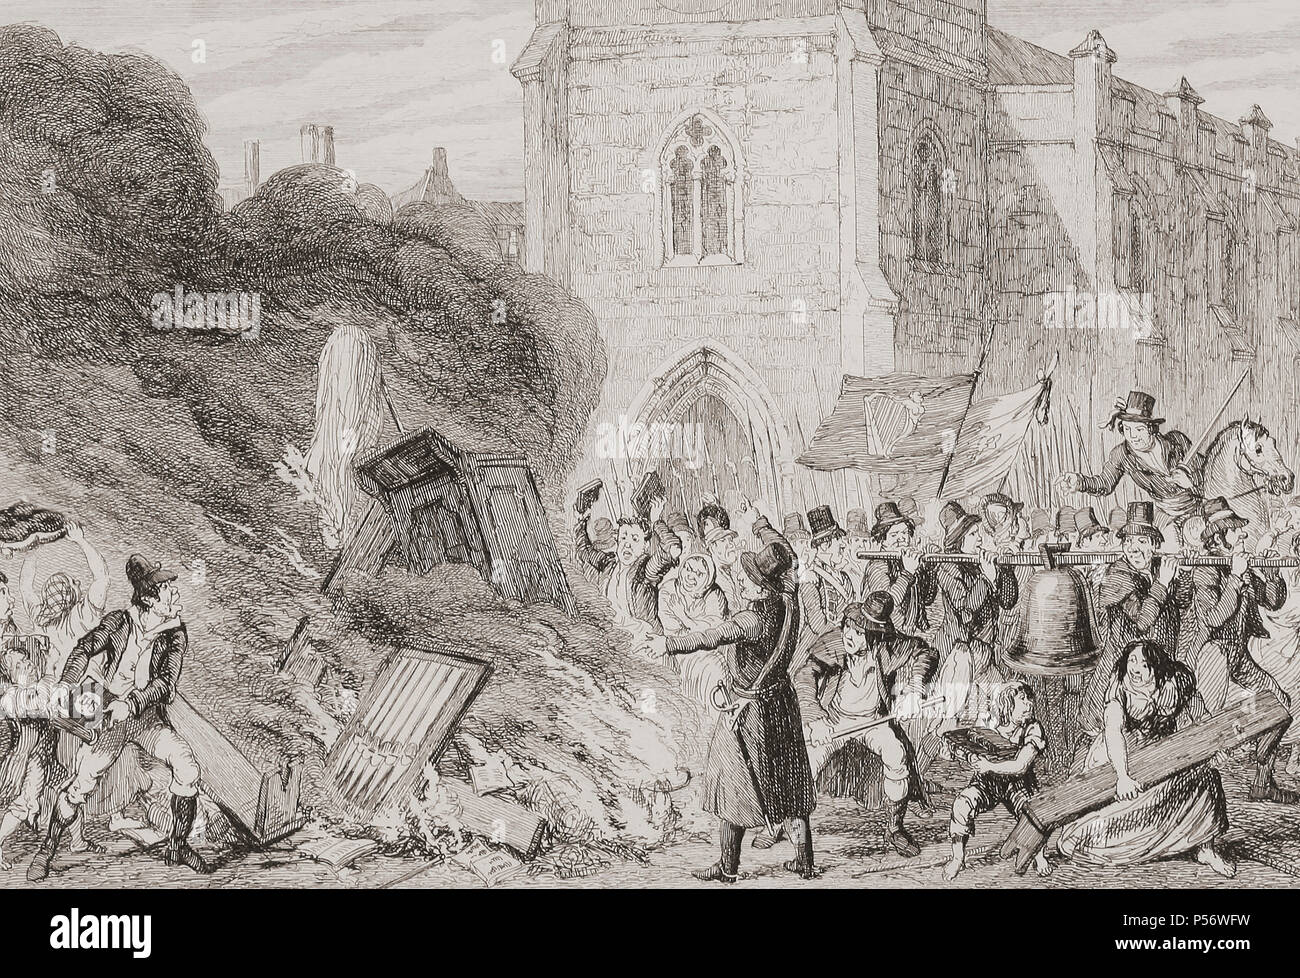 “Destruction of the Church at Enniscorthy”. Illustration by George Cruikshank. An incident during the Irish Rebellion of 1798.  From History of the Irish Rebellion in 1798; with Memoirs of the Union, and Emmett’s Insurrection in 1803 by W.H. Maxwell. Published in London 1854. Stock Photo